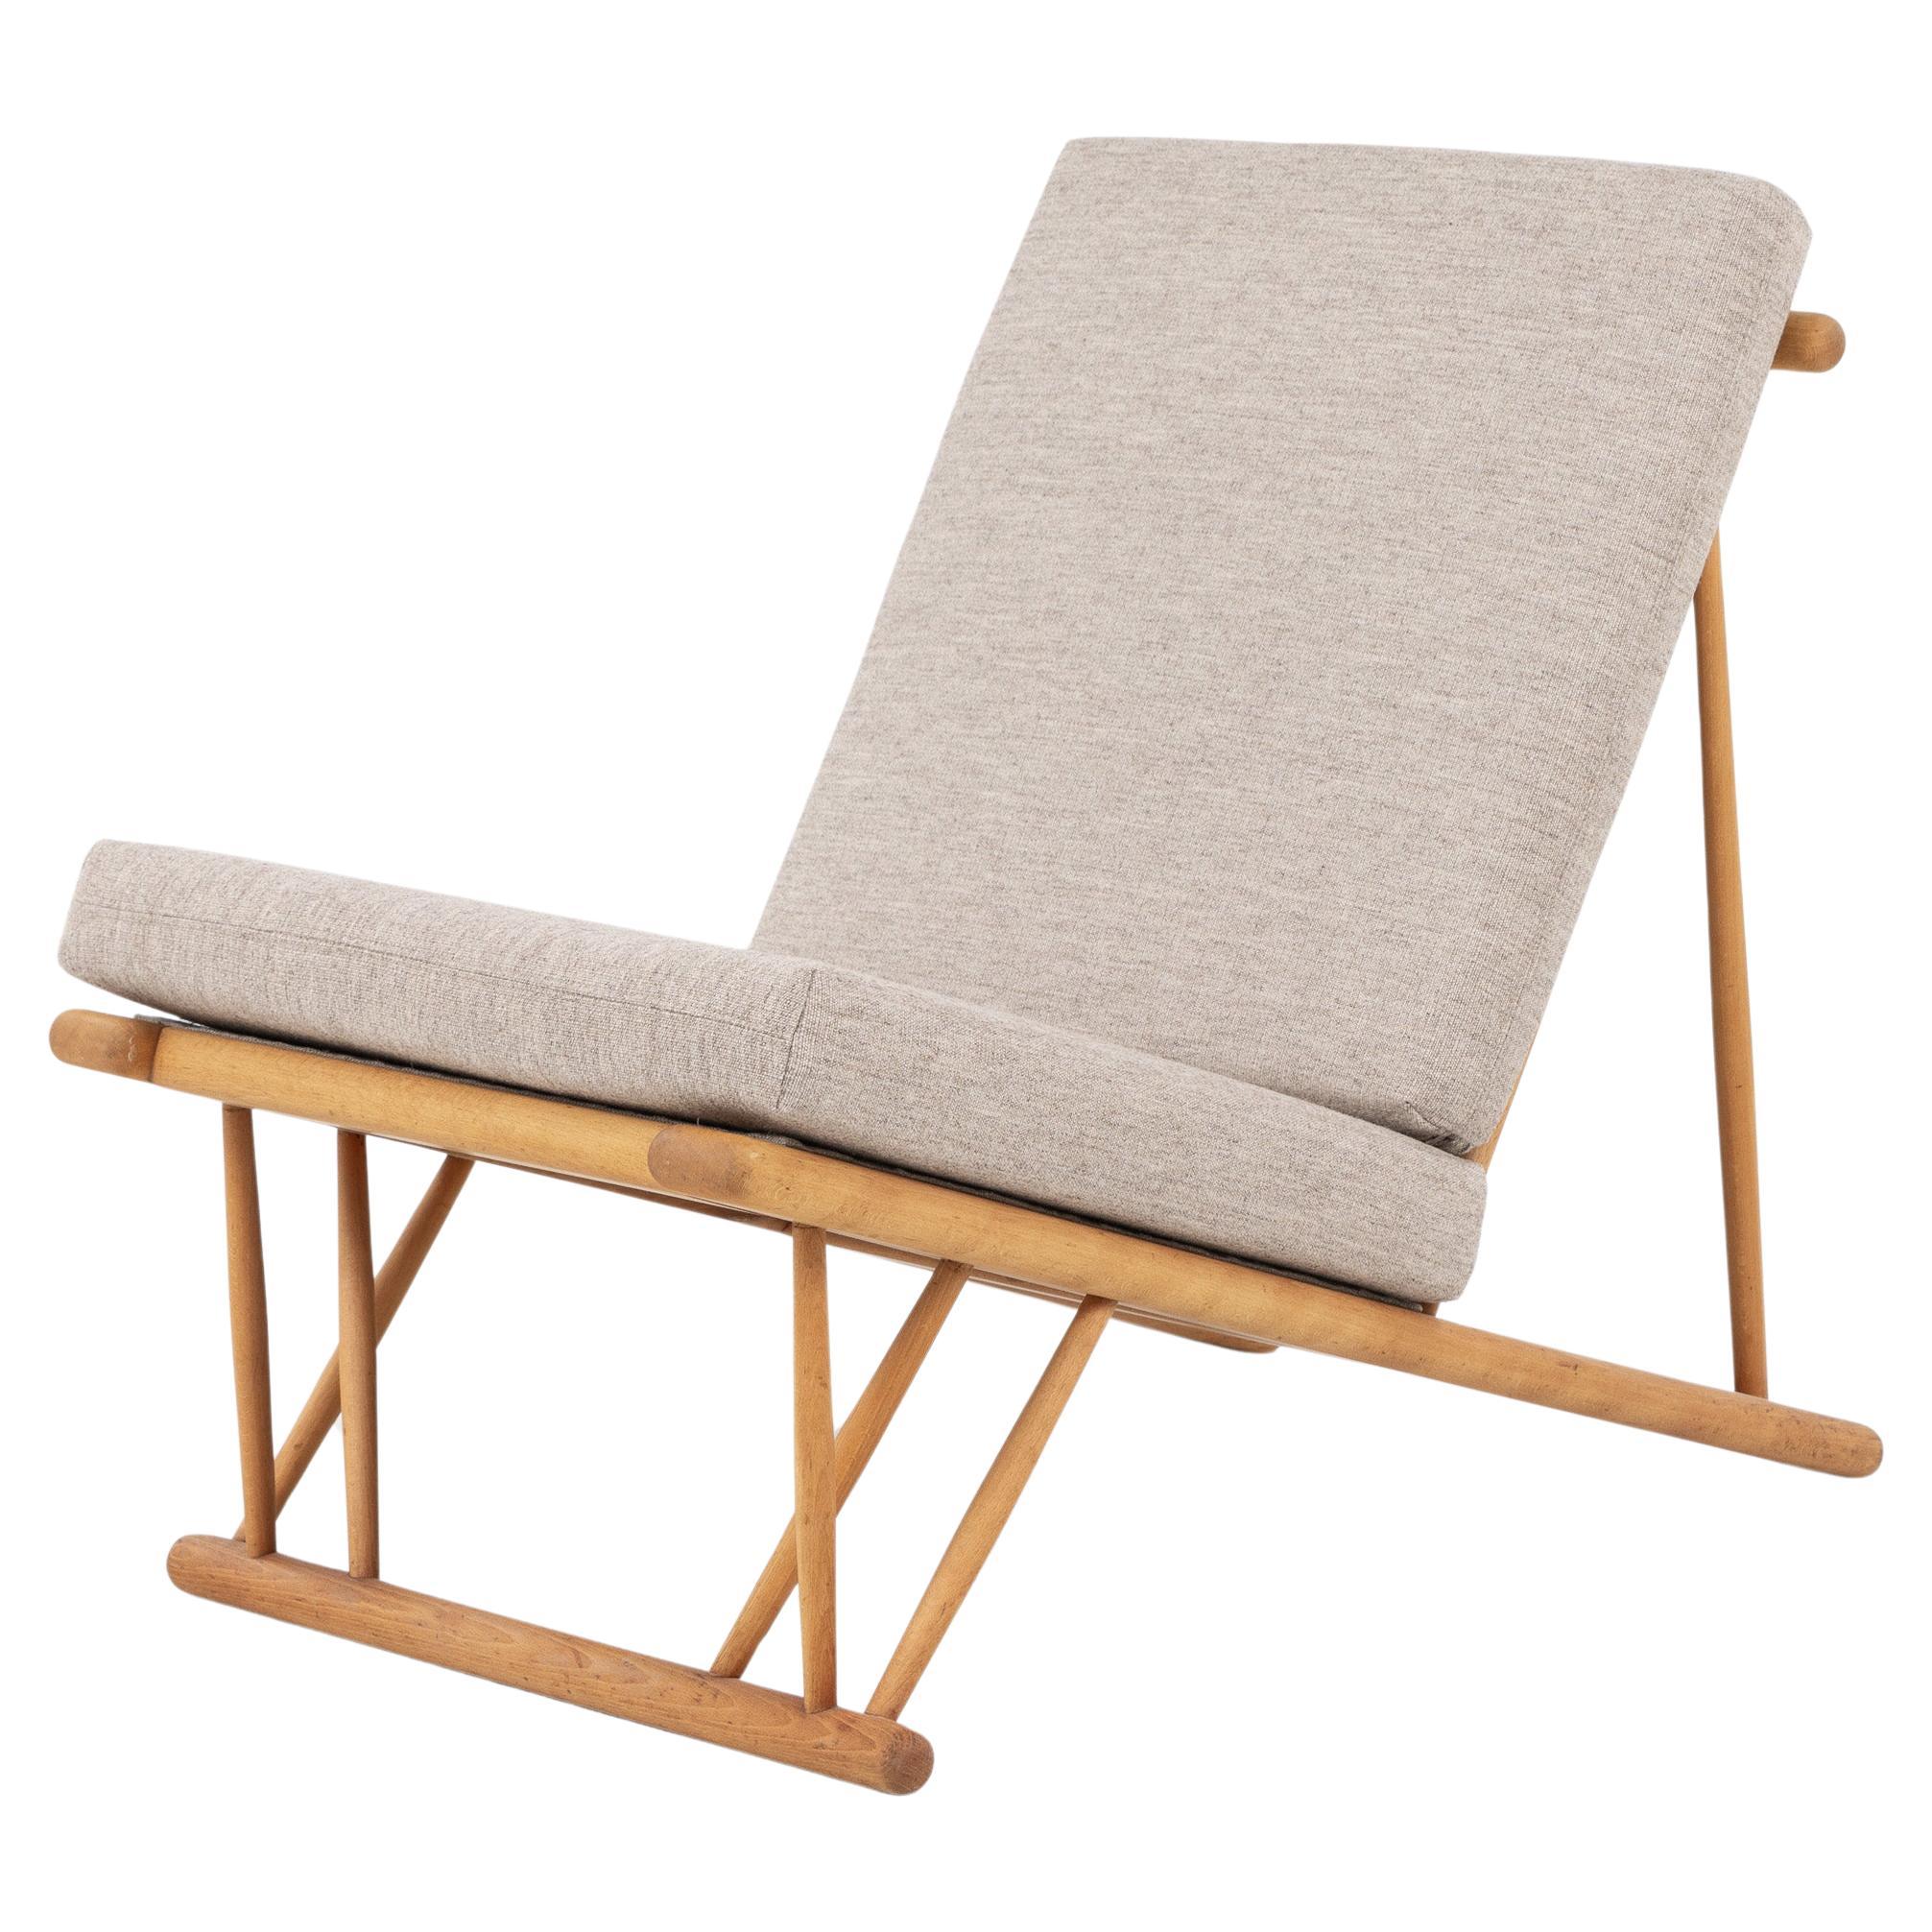 Model J58 Easy chair in beech by Poul Volther